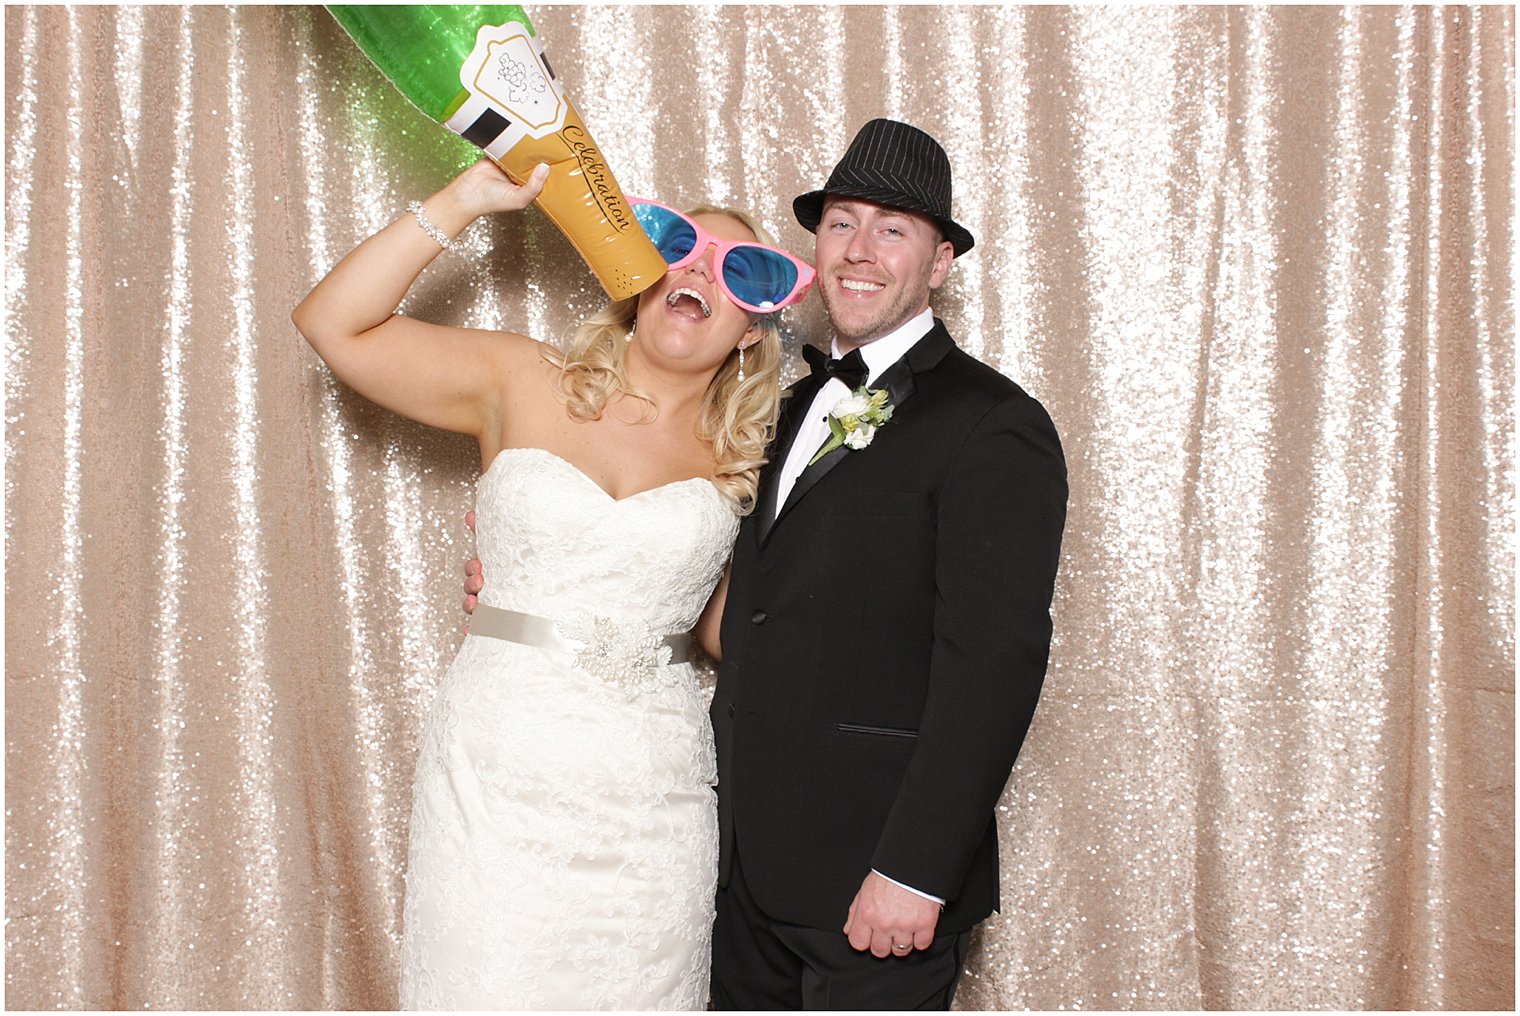 Bride and groom in Photo Booth